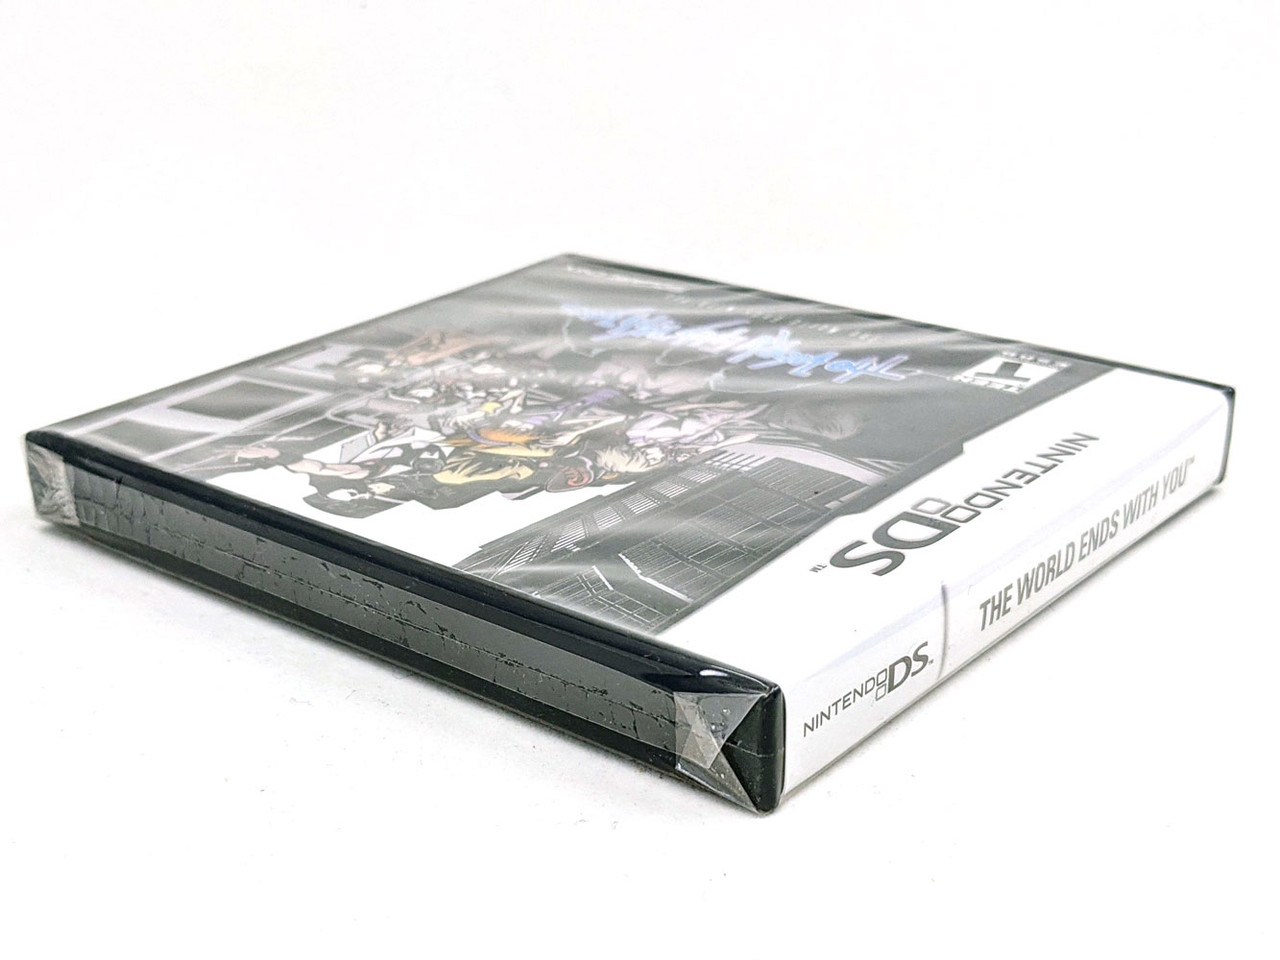 The World Ends With You (Nintendo DS)